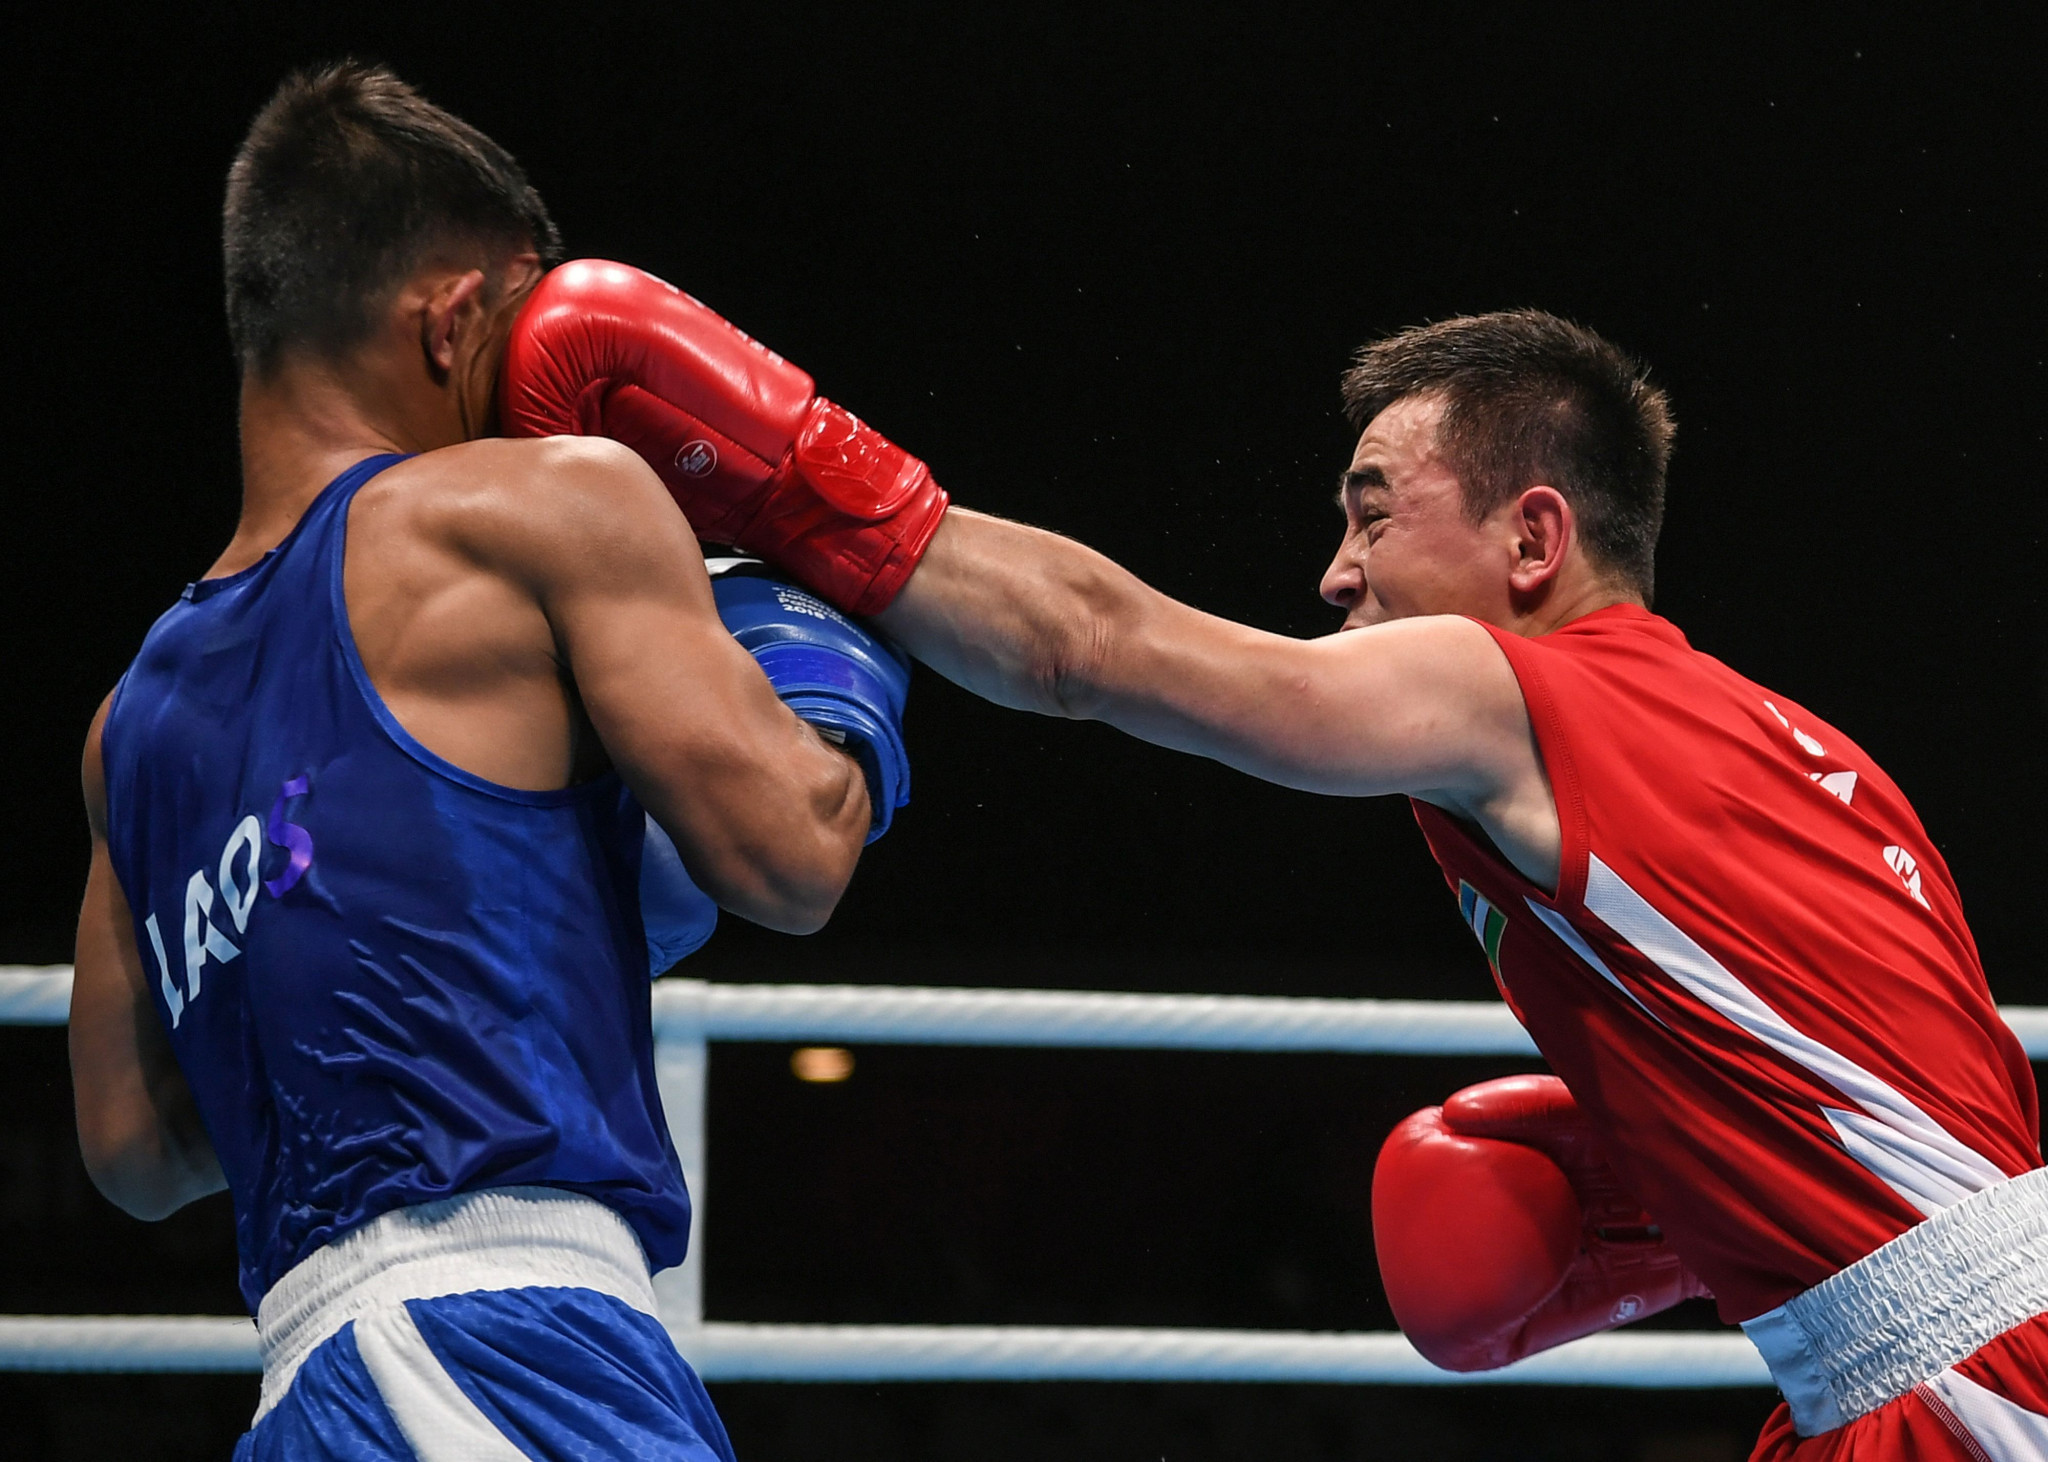 Olympic gold medallist Hasanboy Dusmatov cruised into the quarter-finals of the flyweight division at the ASBC Elite Boxing Championships in Bangkok ©Getty Images